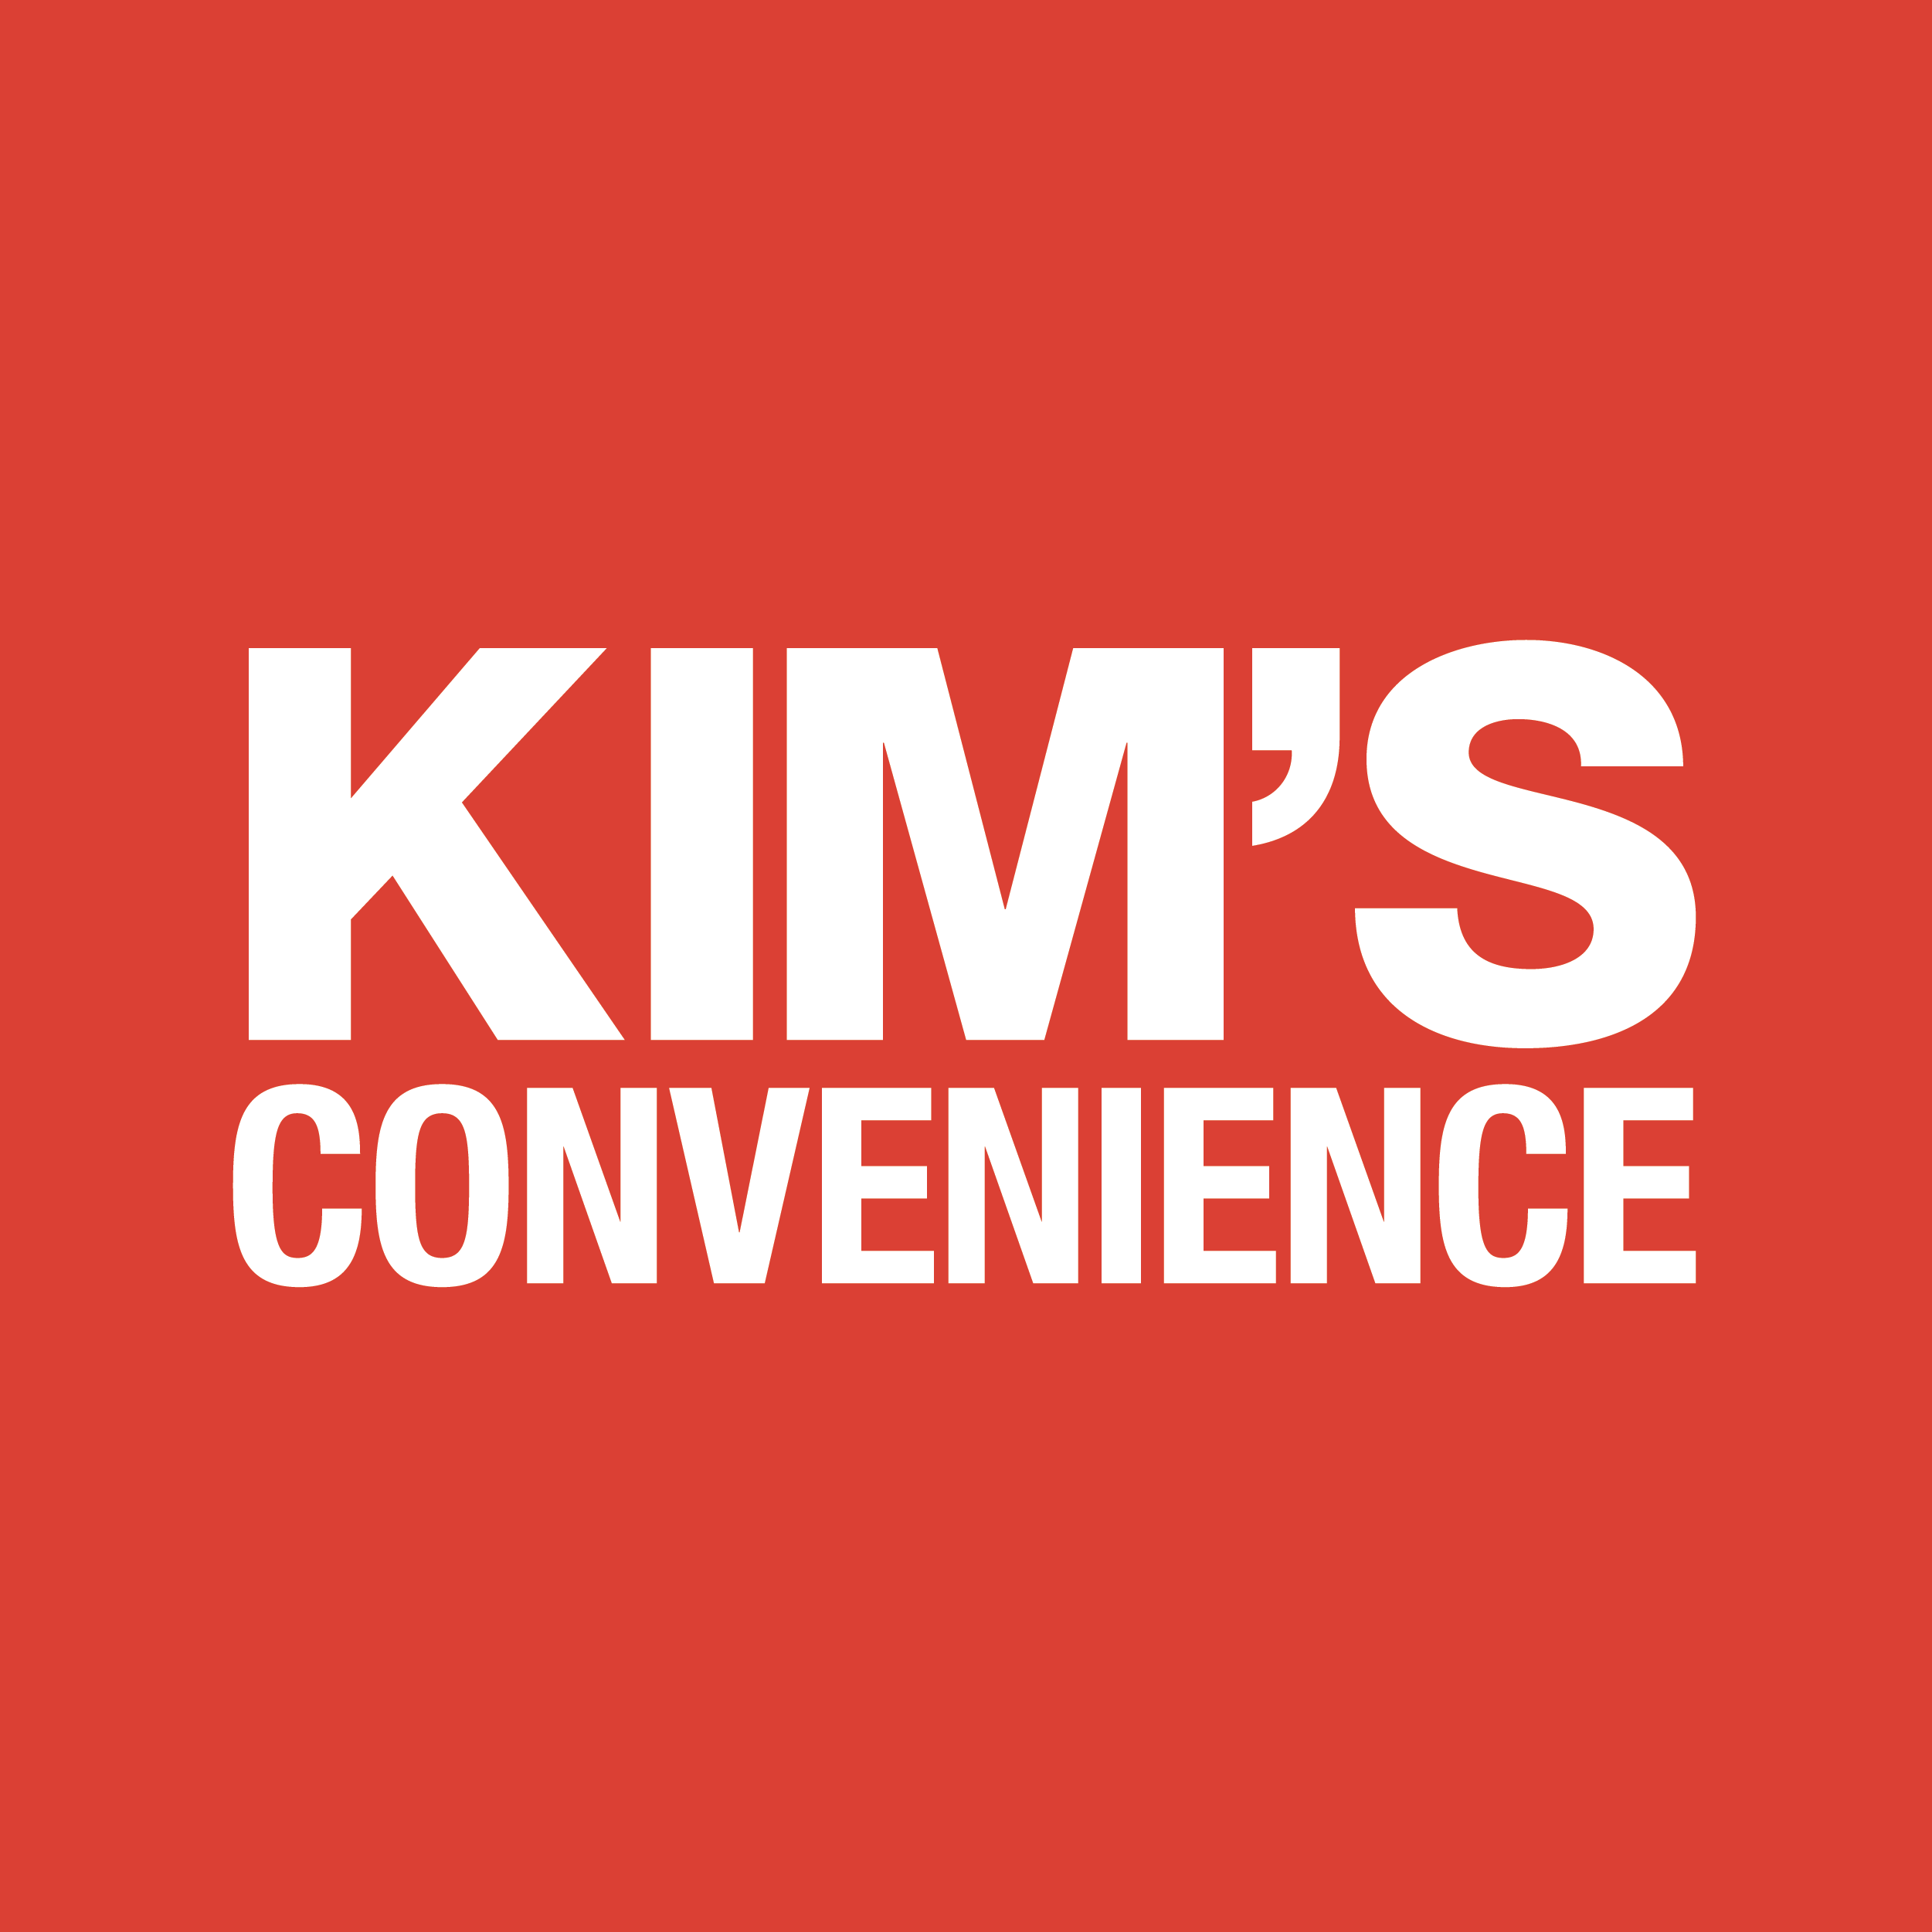 Kim's Convenience GIFs on GIPHY - Be Animated.